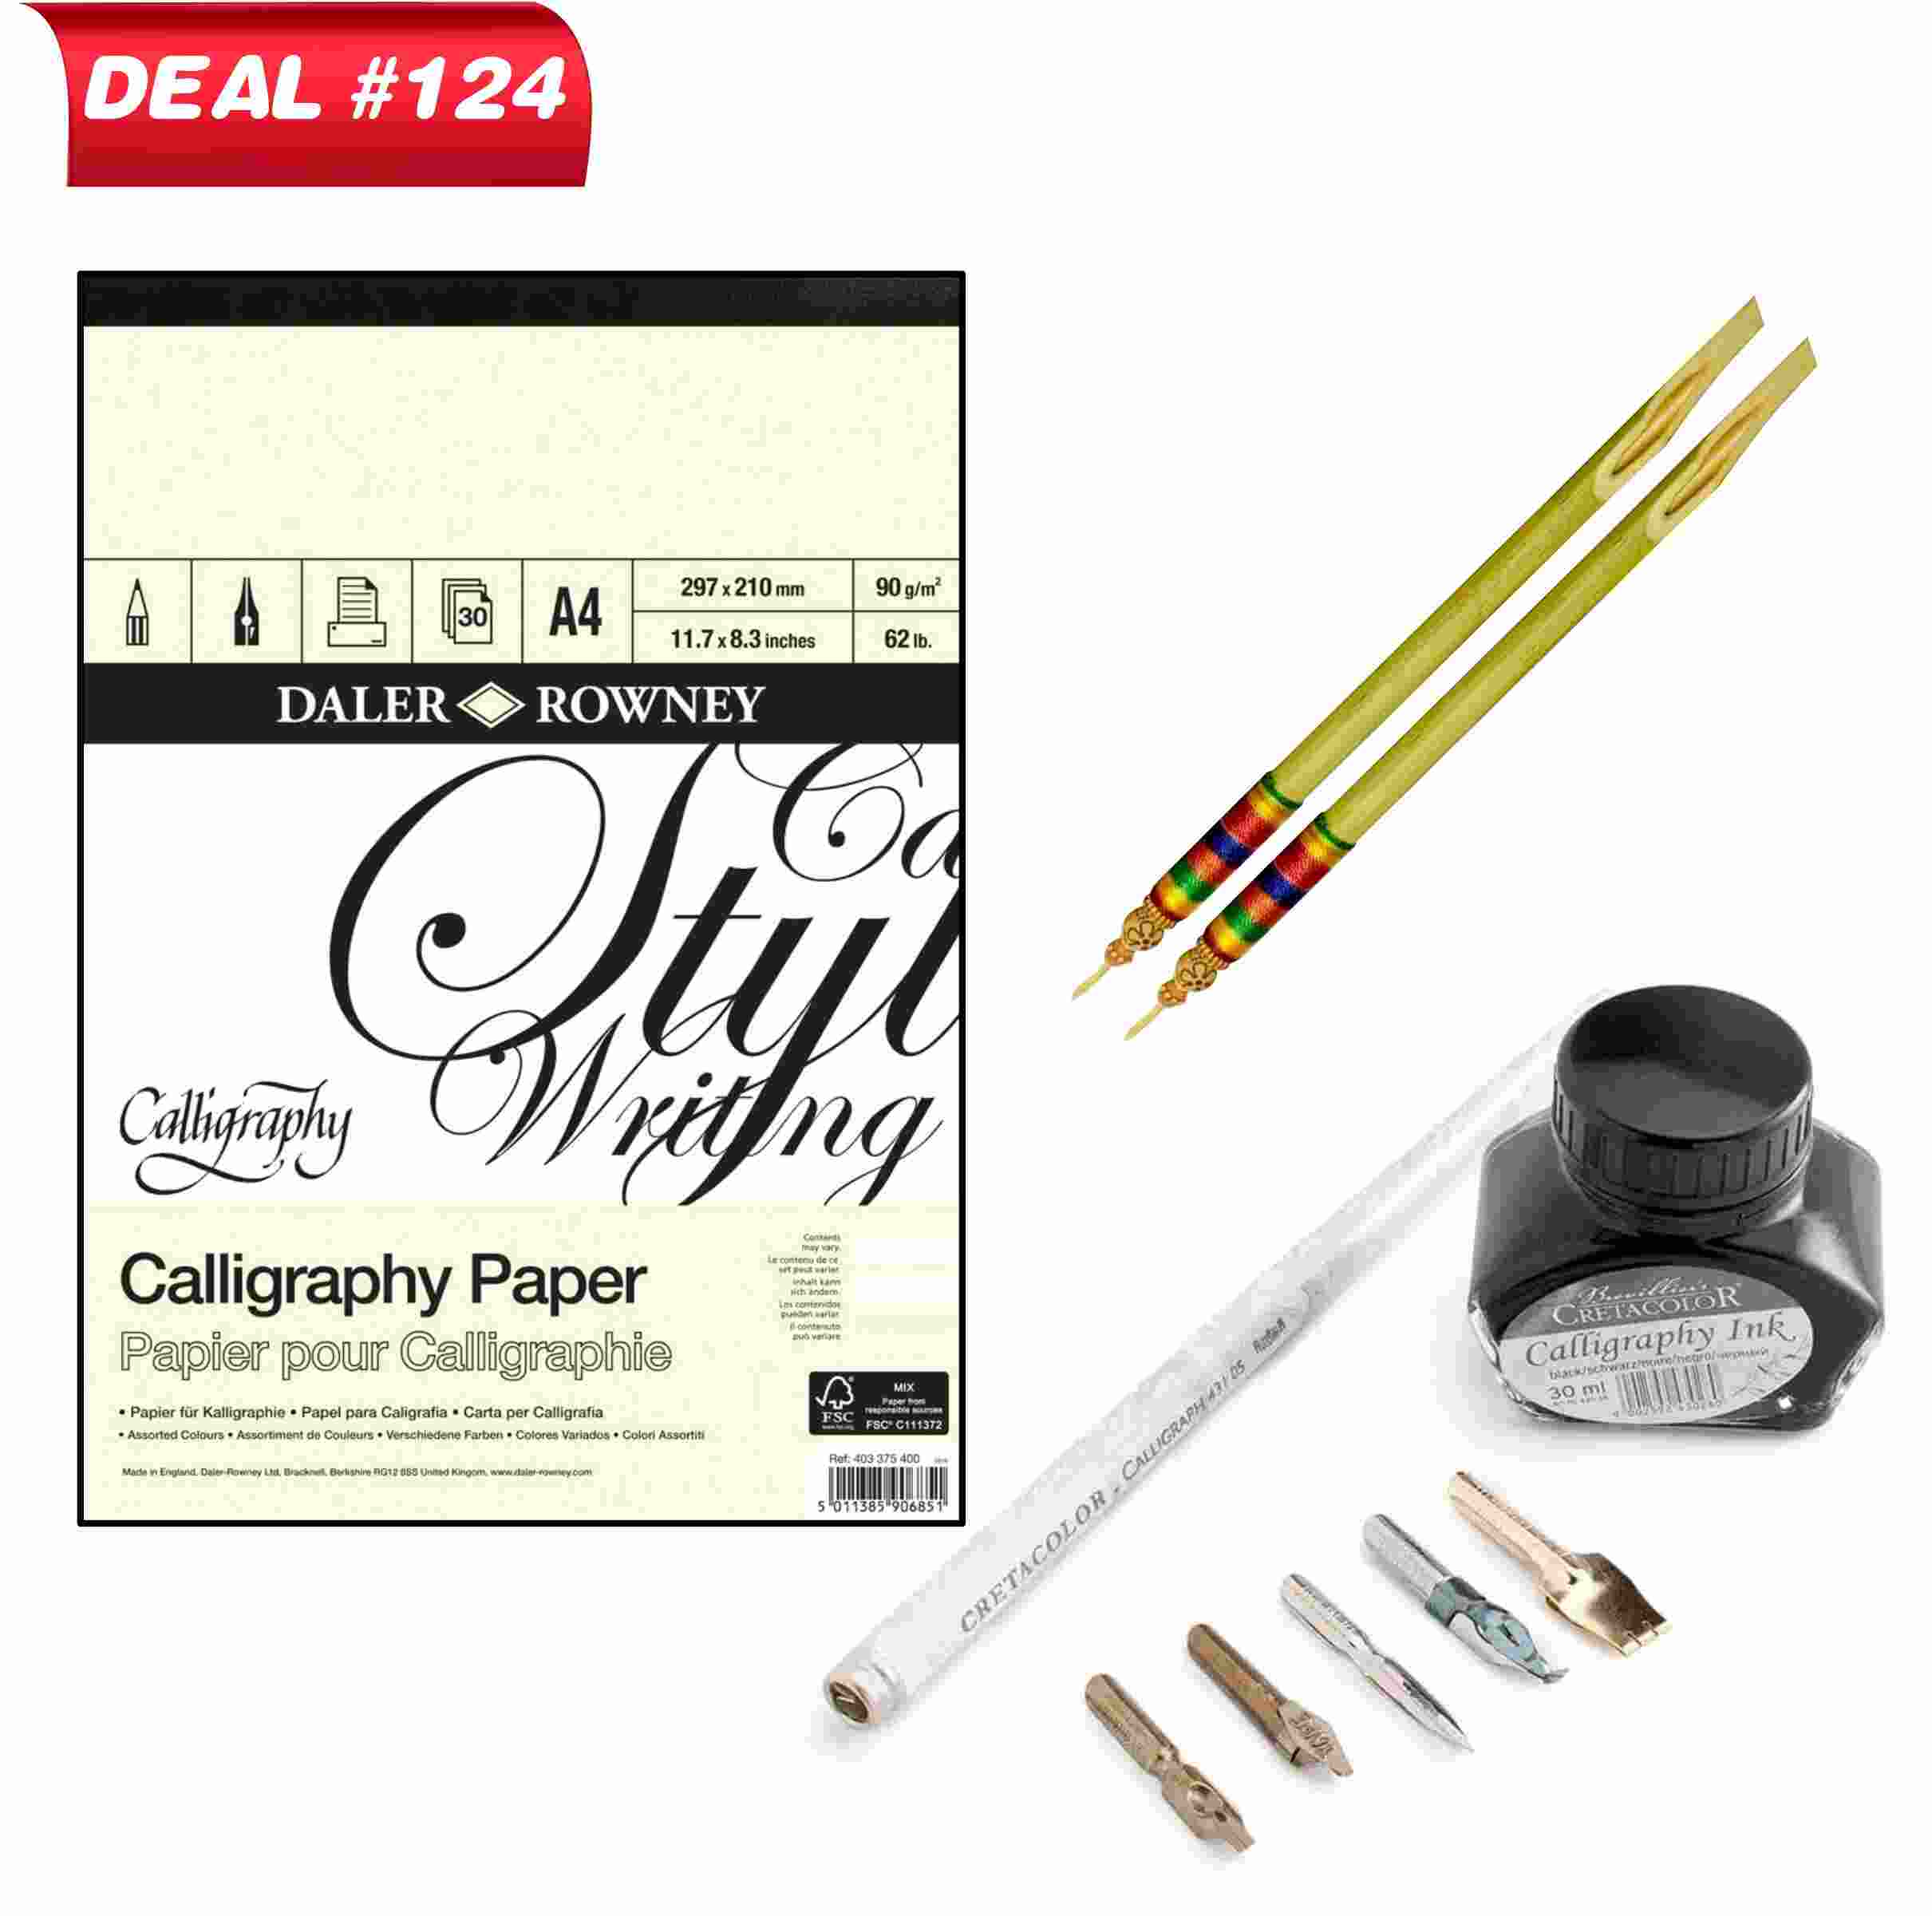 Calligraphy Kit For Professional Artist's, Deal No.124